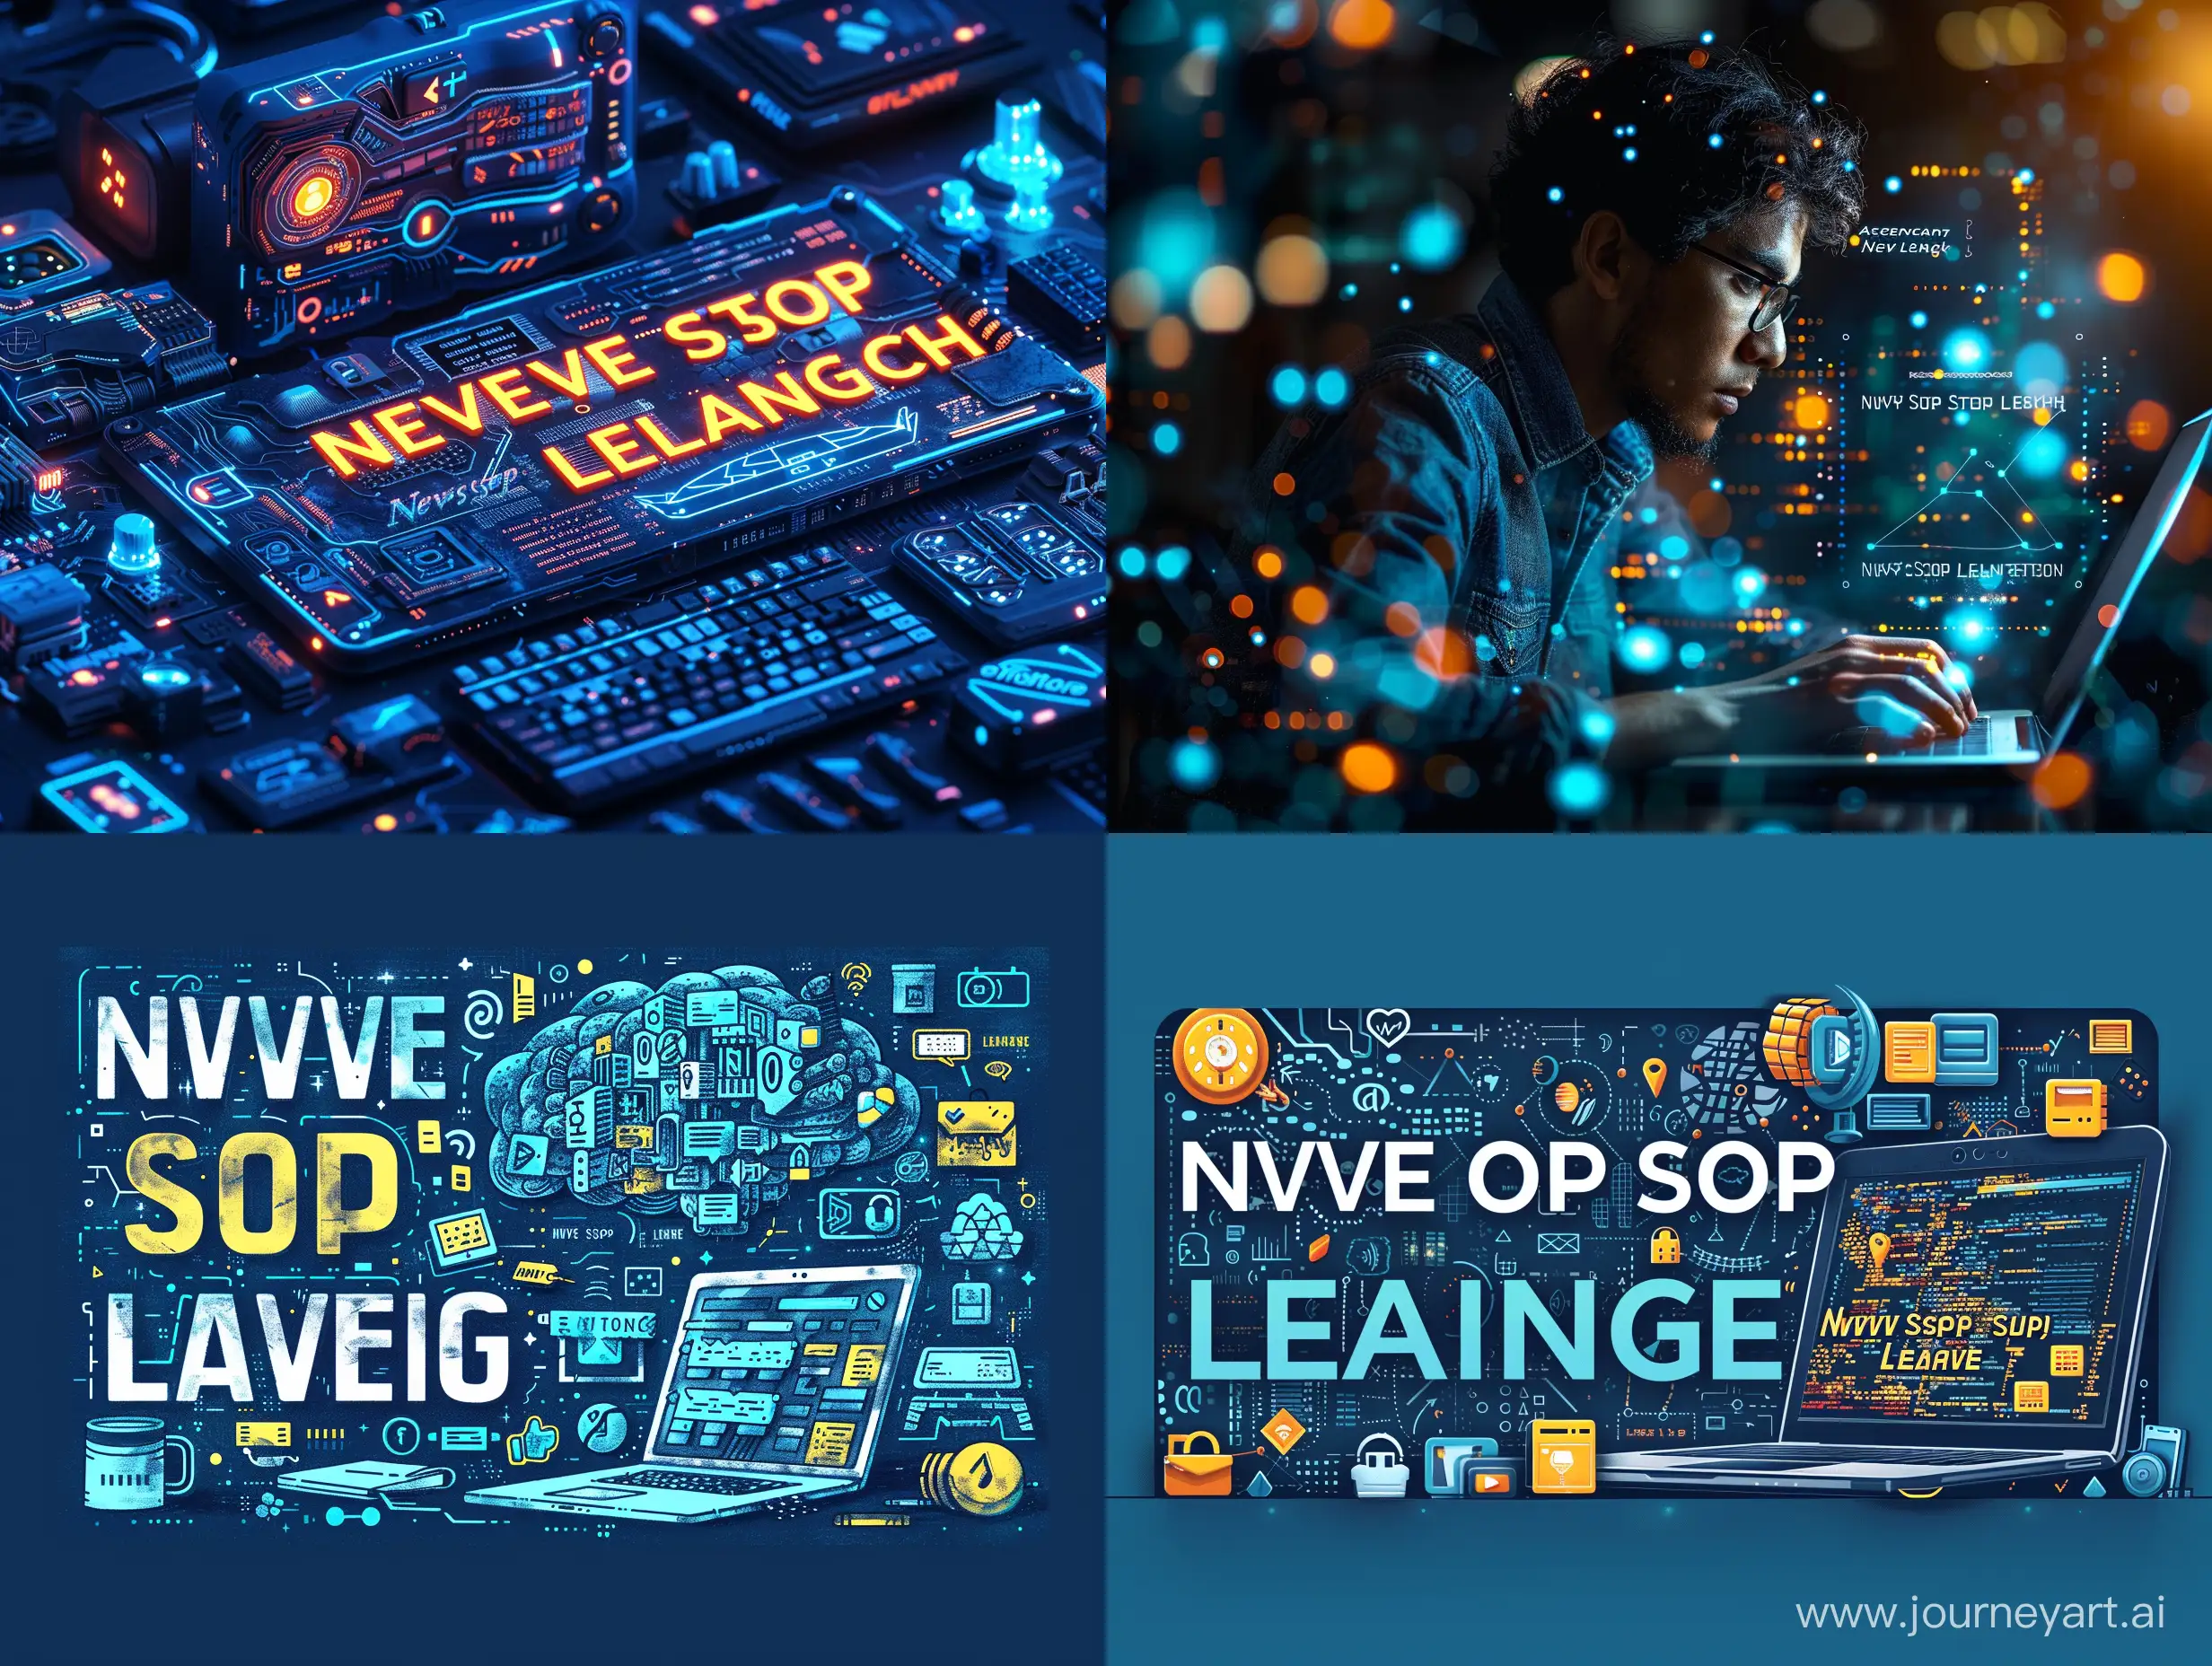 Generate an image for a LinkedIn profile cover. The image should have a technology or programming theme, representing the professional life of a software engineer and programmer. Incorporate elements like code snippets, a laptop, or other tech-related icons. The image should have a modern, clean aesthetic, with cool tones like blues and grays. Please include the phrase 'Never Stop Learning' prominently within the image. The text should be in a bold, easy-to-read font. --s 750 --v 6 --ar 4:3 --no 89993